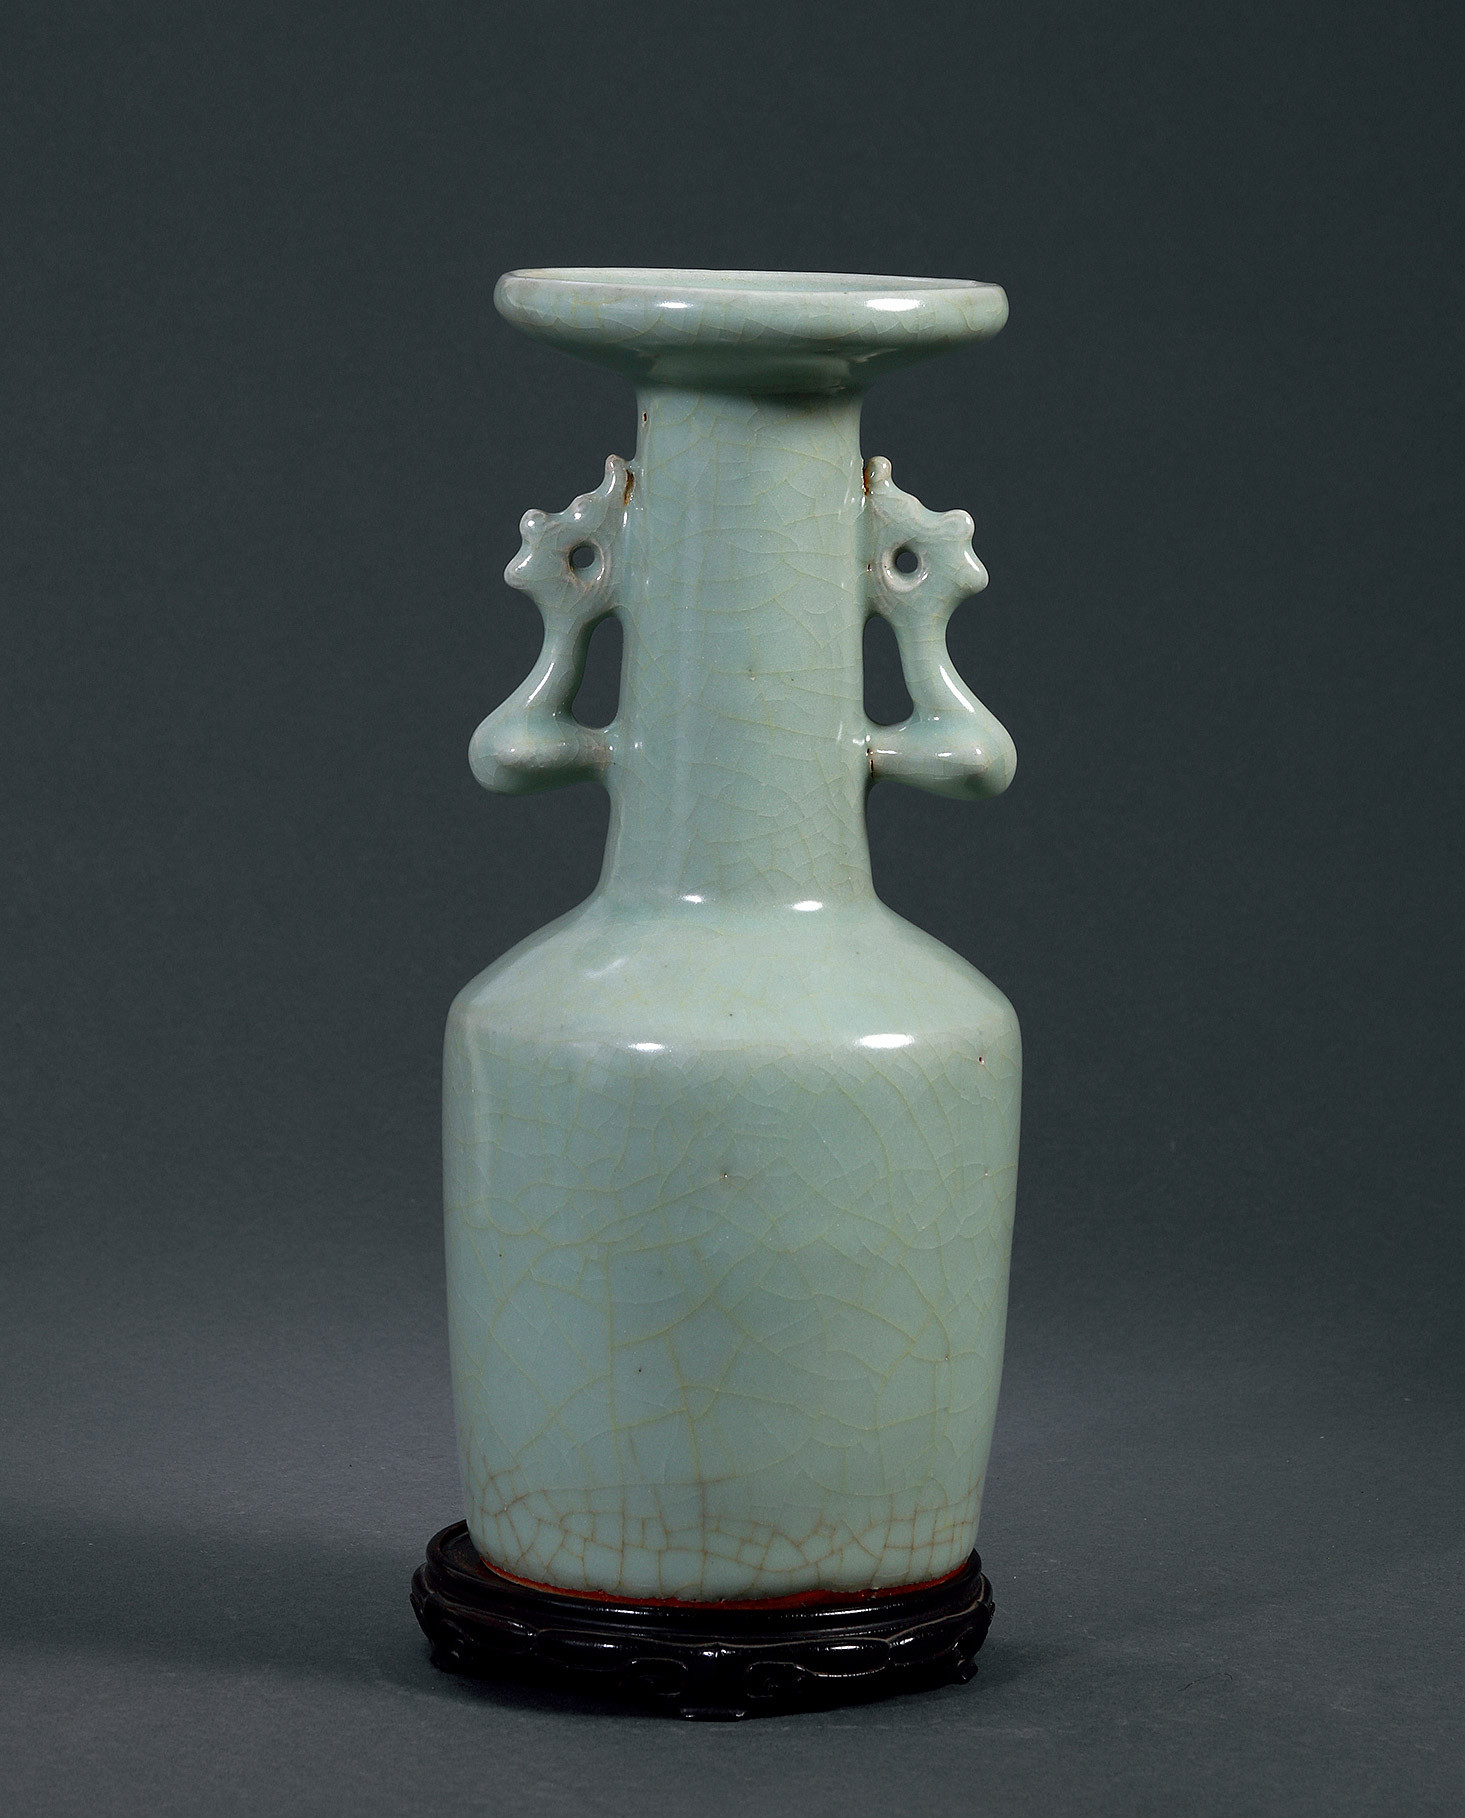 A LONGQUAN WARE VASE WITH HANDLES